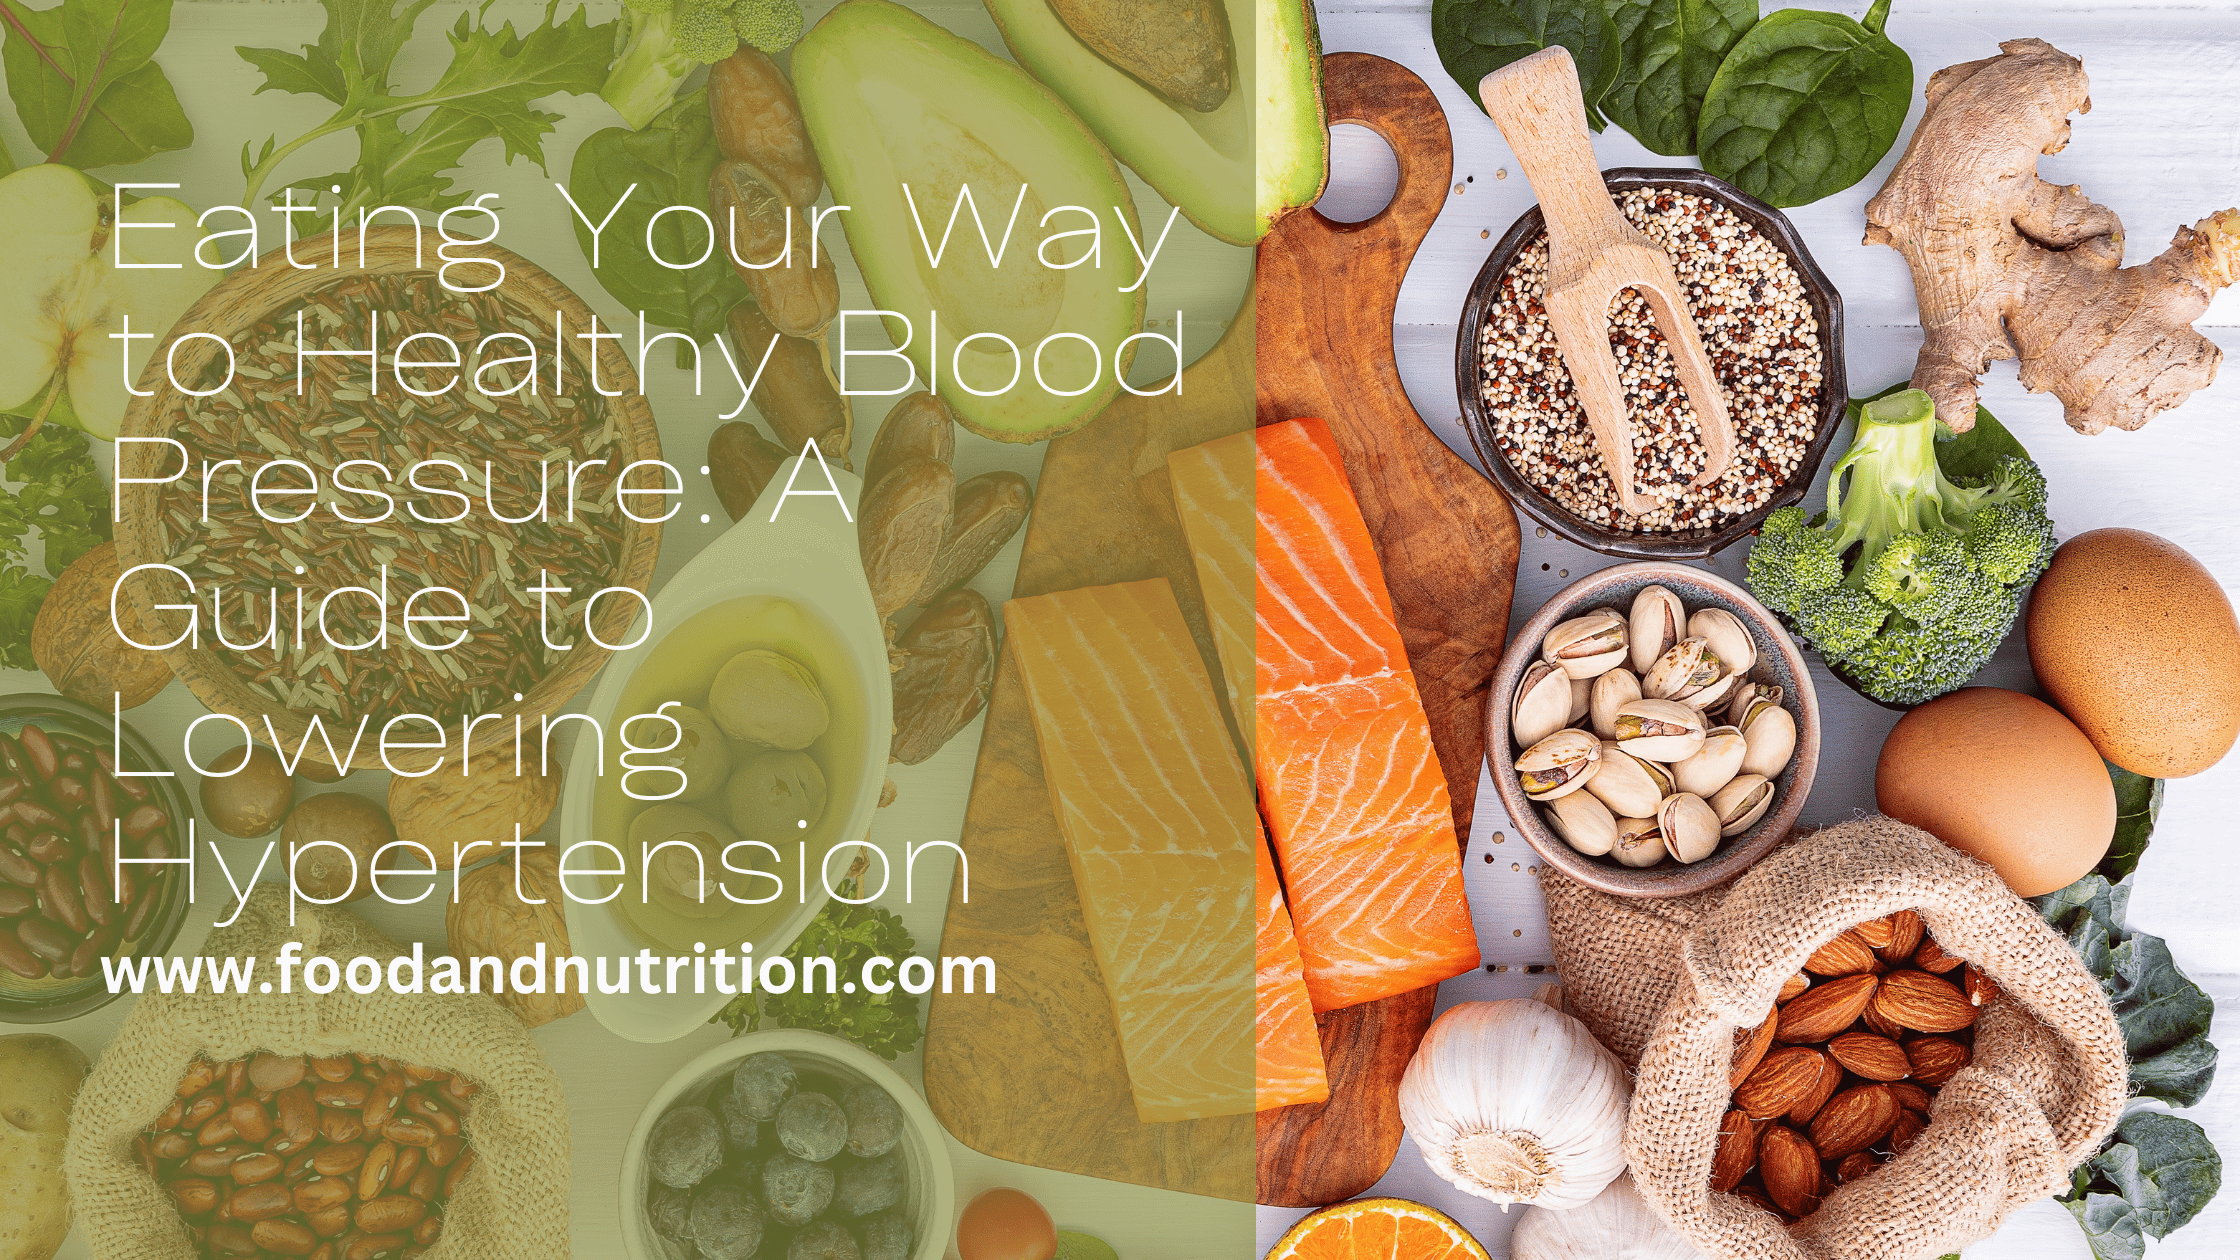 Eating Your Way to Healthy Blood Pressure: A Guide to Lowering Hypertension